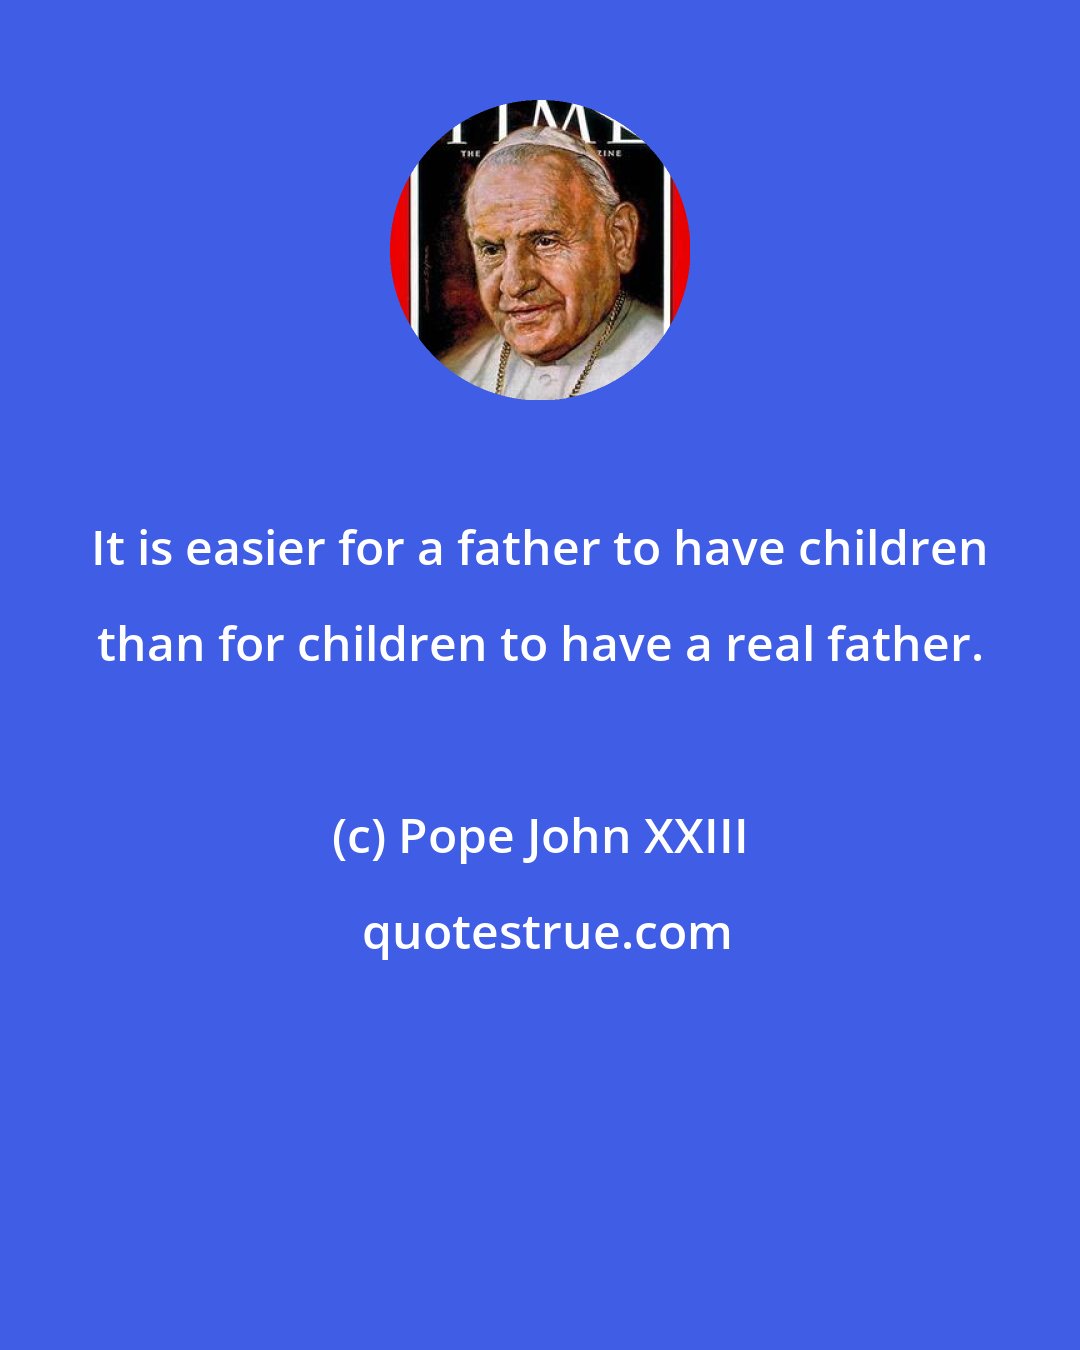 Pope John XXIII: It is easier for a father to have children than for children to have a real father.